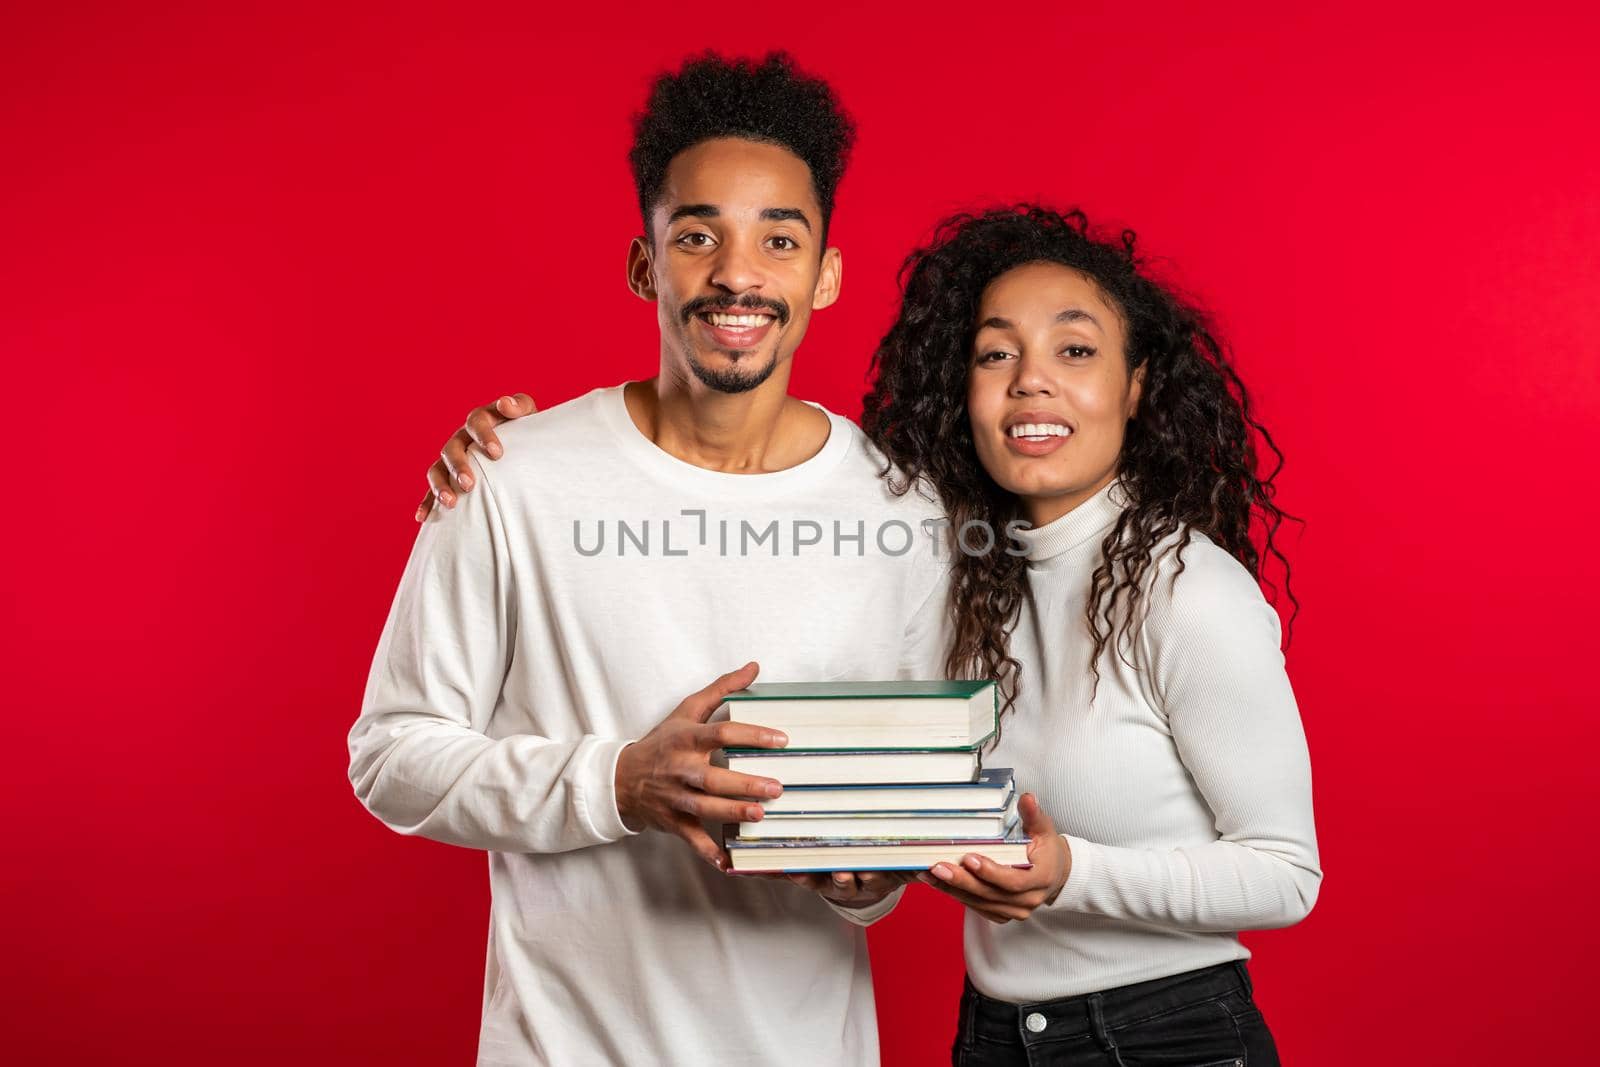 African students on red background in studio holds stack of university books from library. Classmates smiles, they happy to graduate